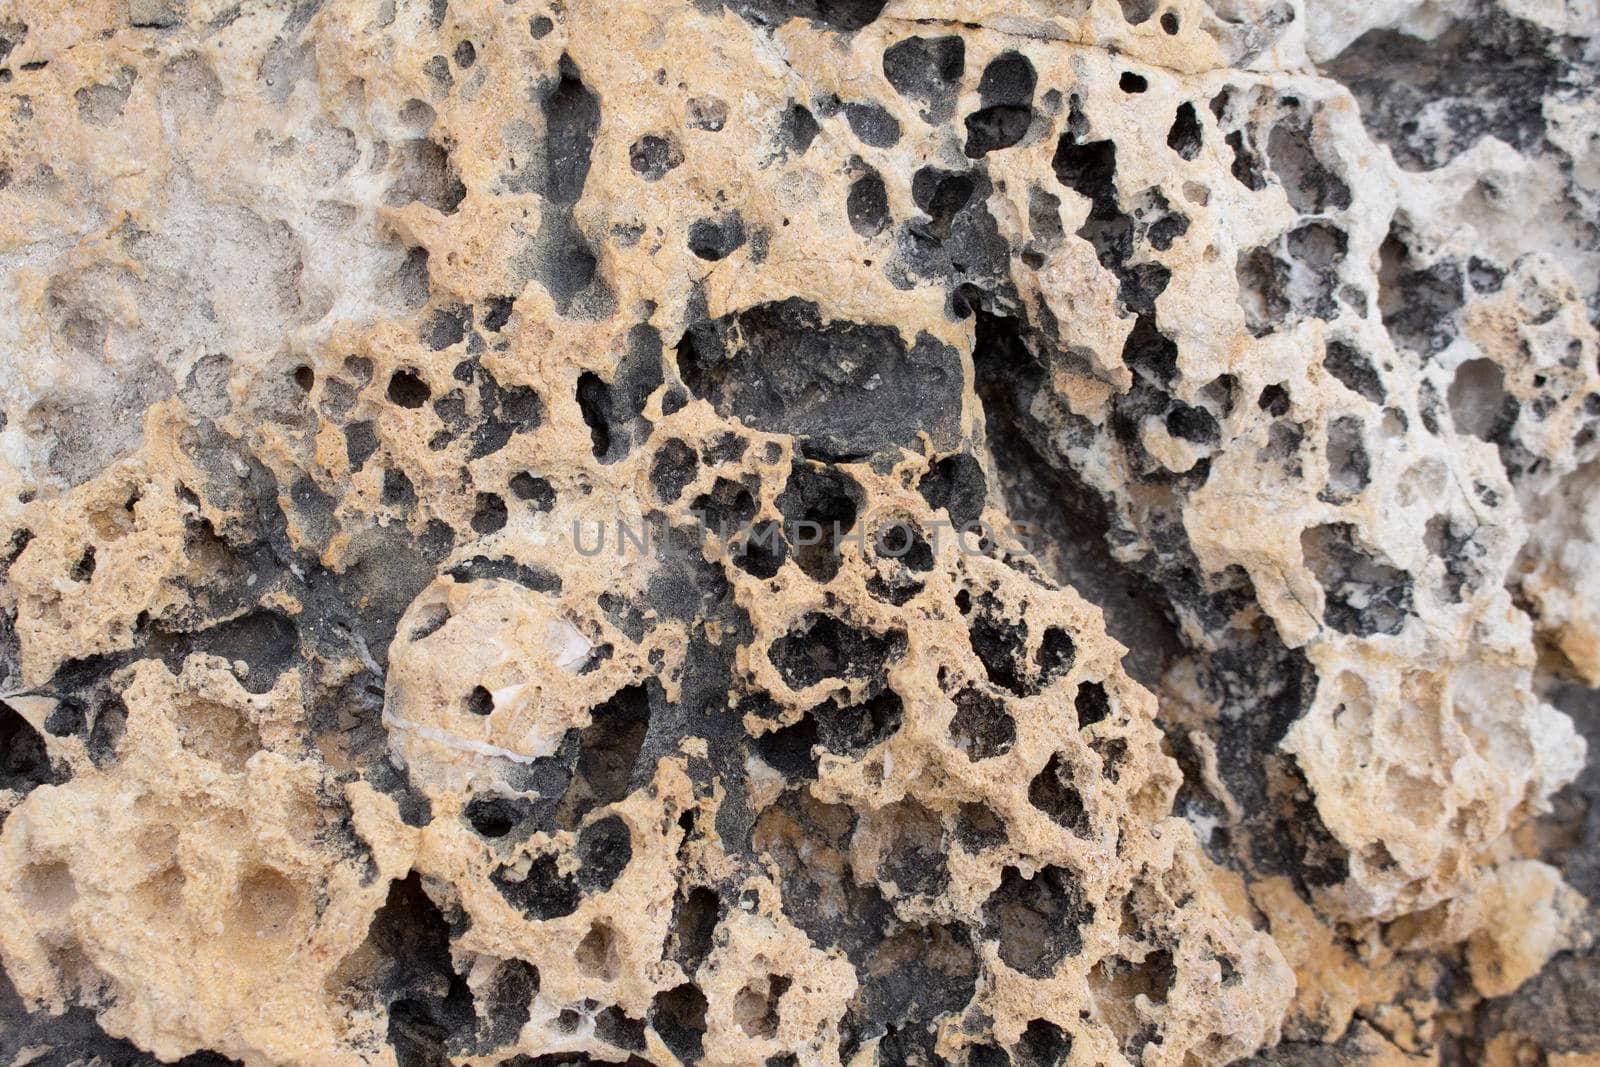 beige background natural stone with cracks and holes macro view